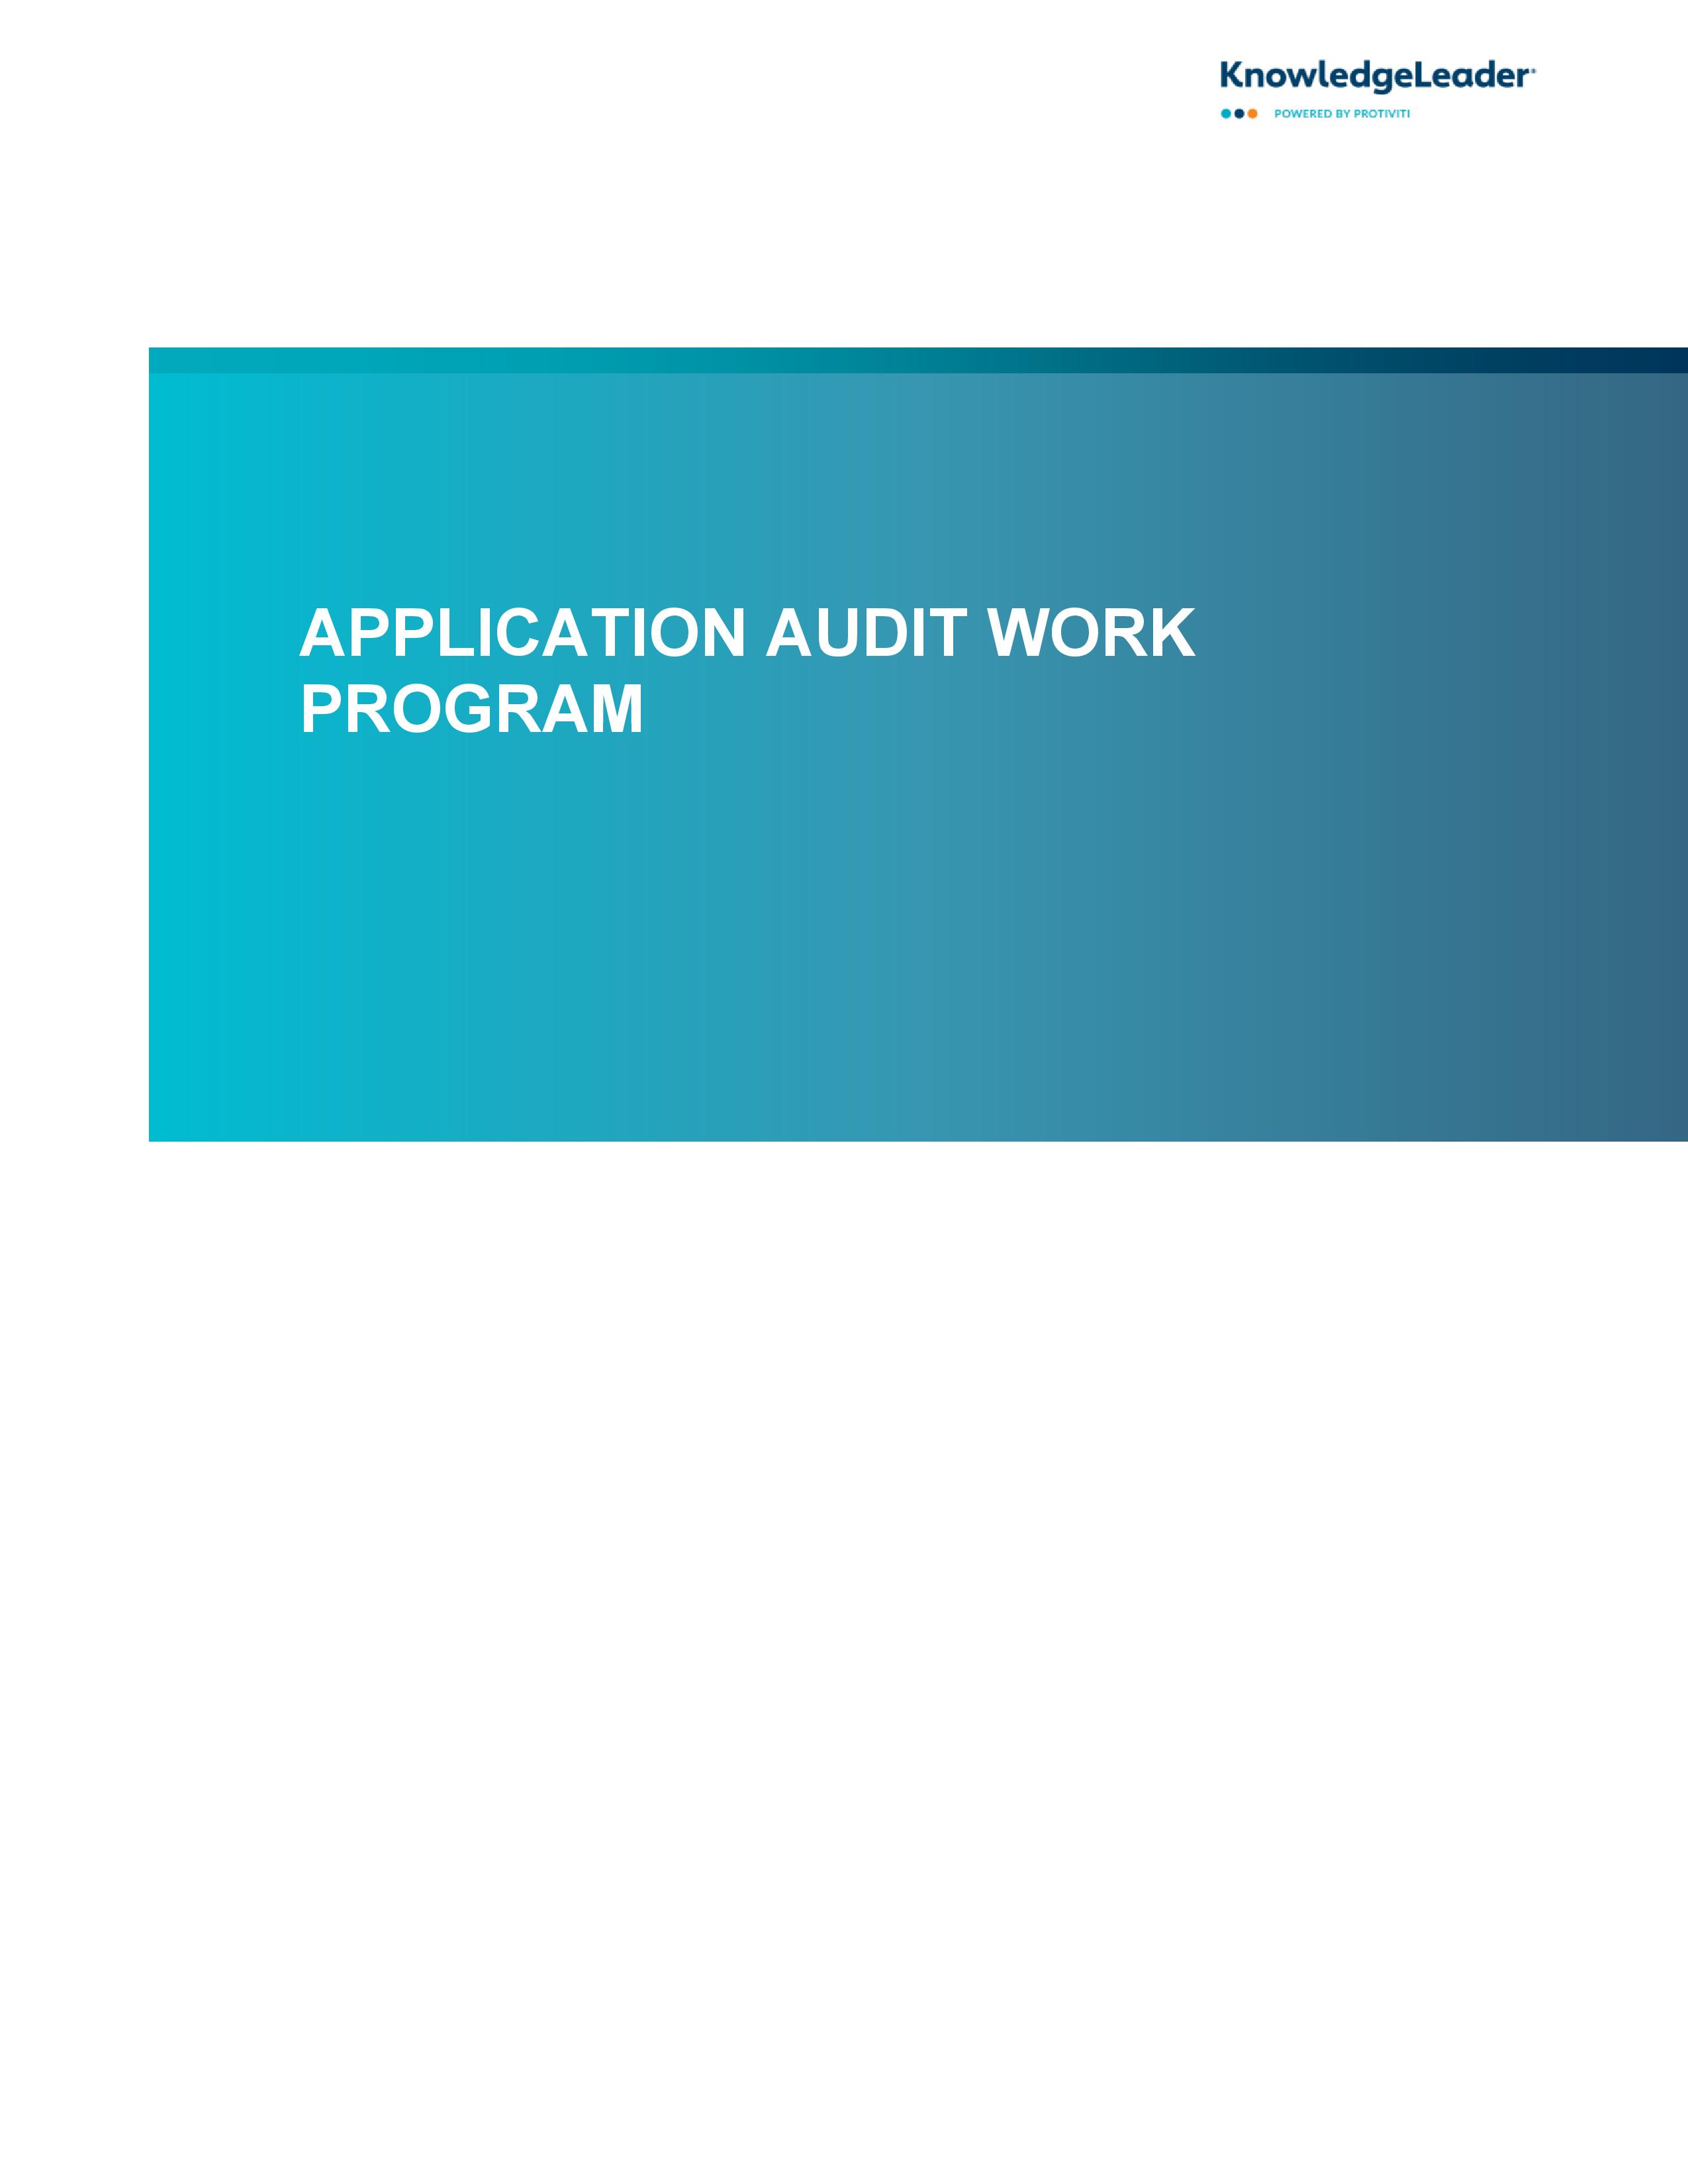 screenshot of the first page of the application audit work program